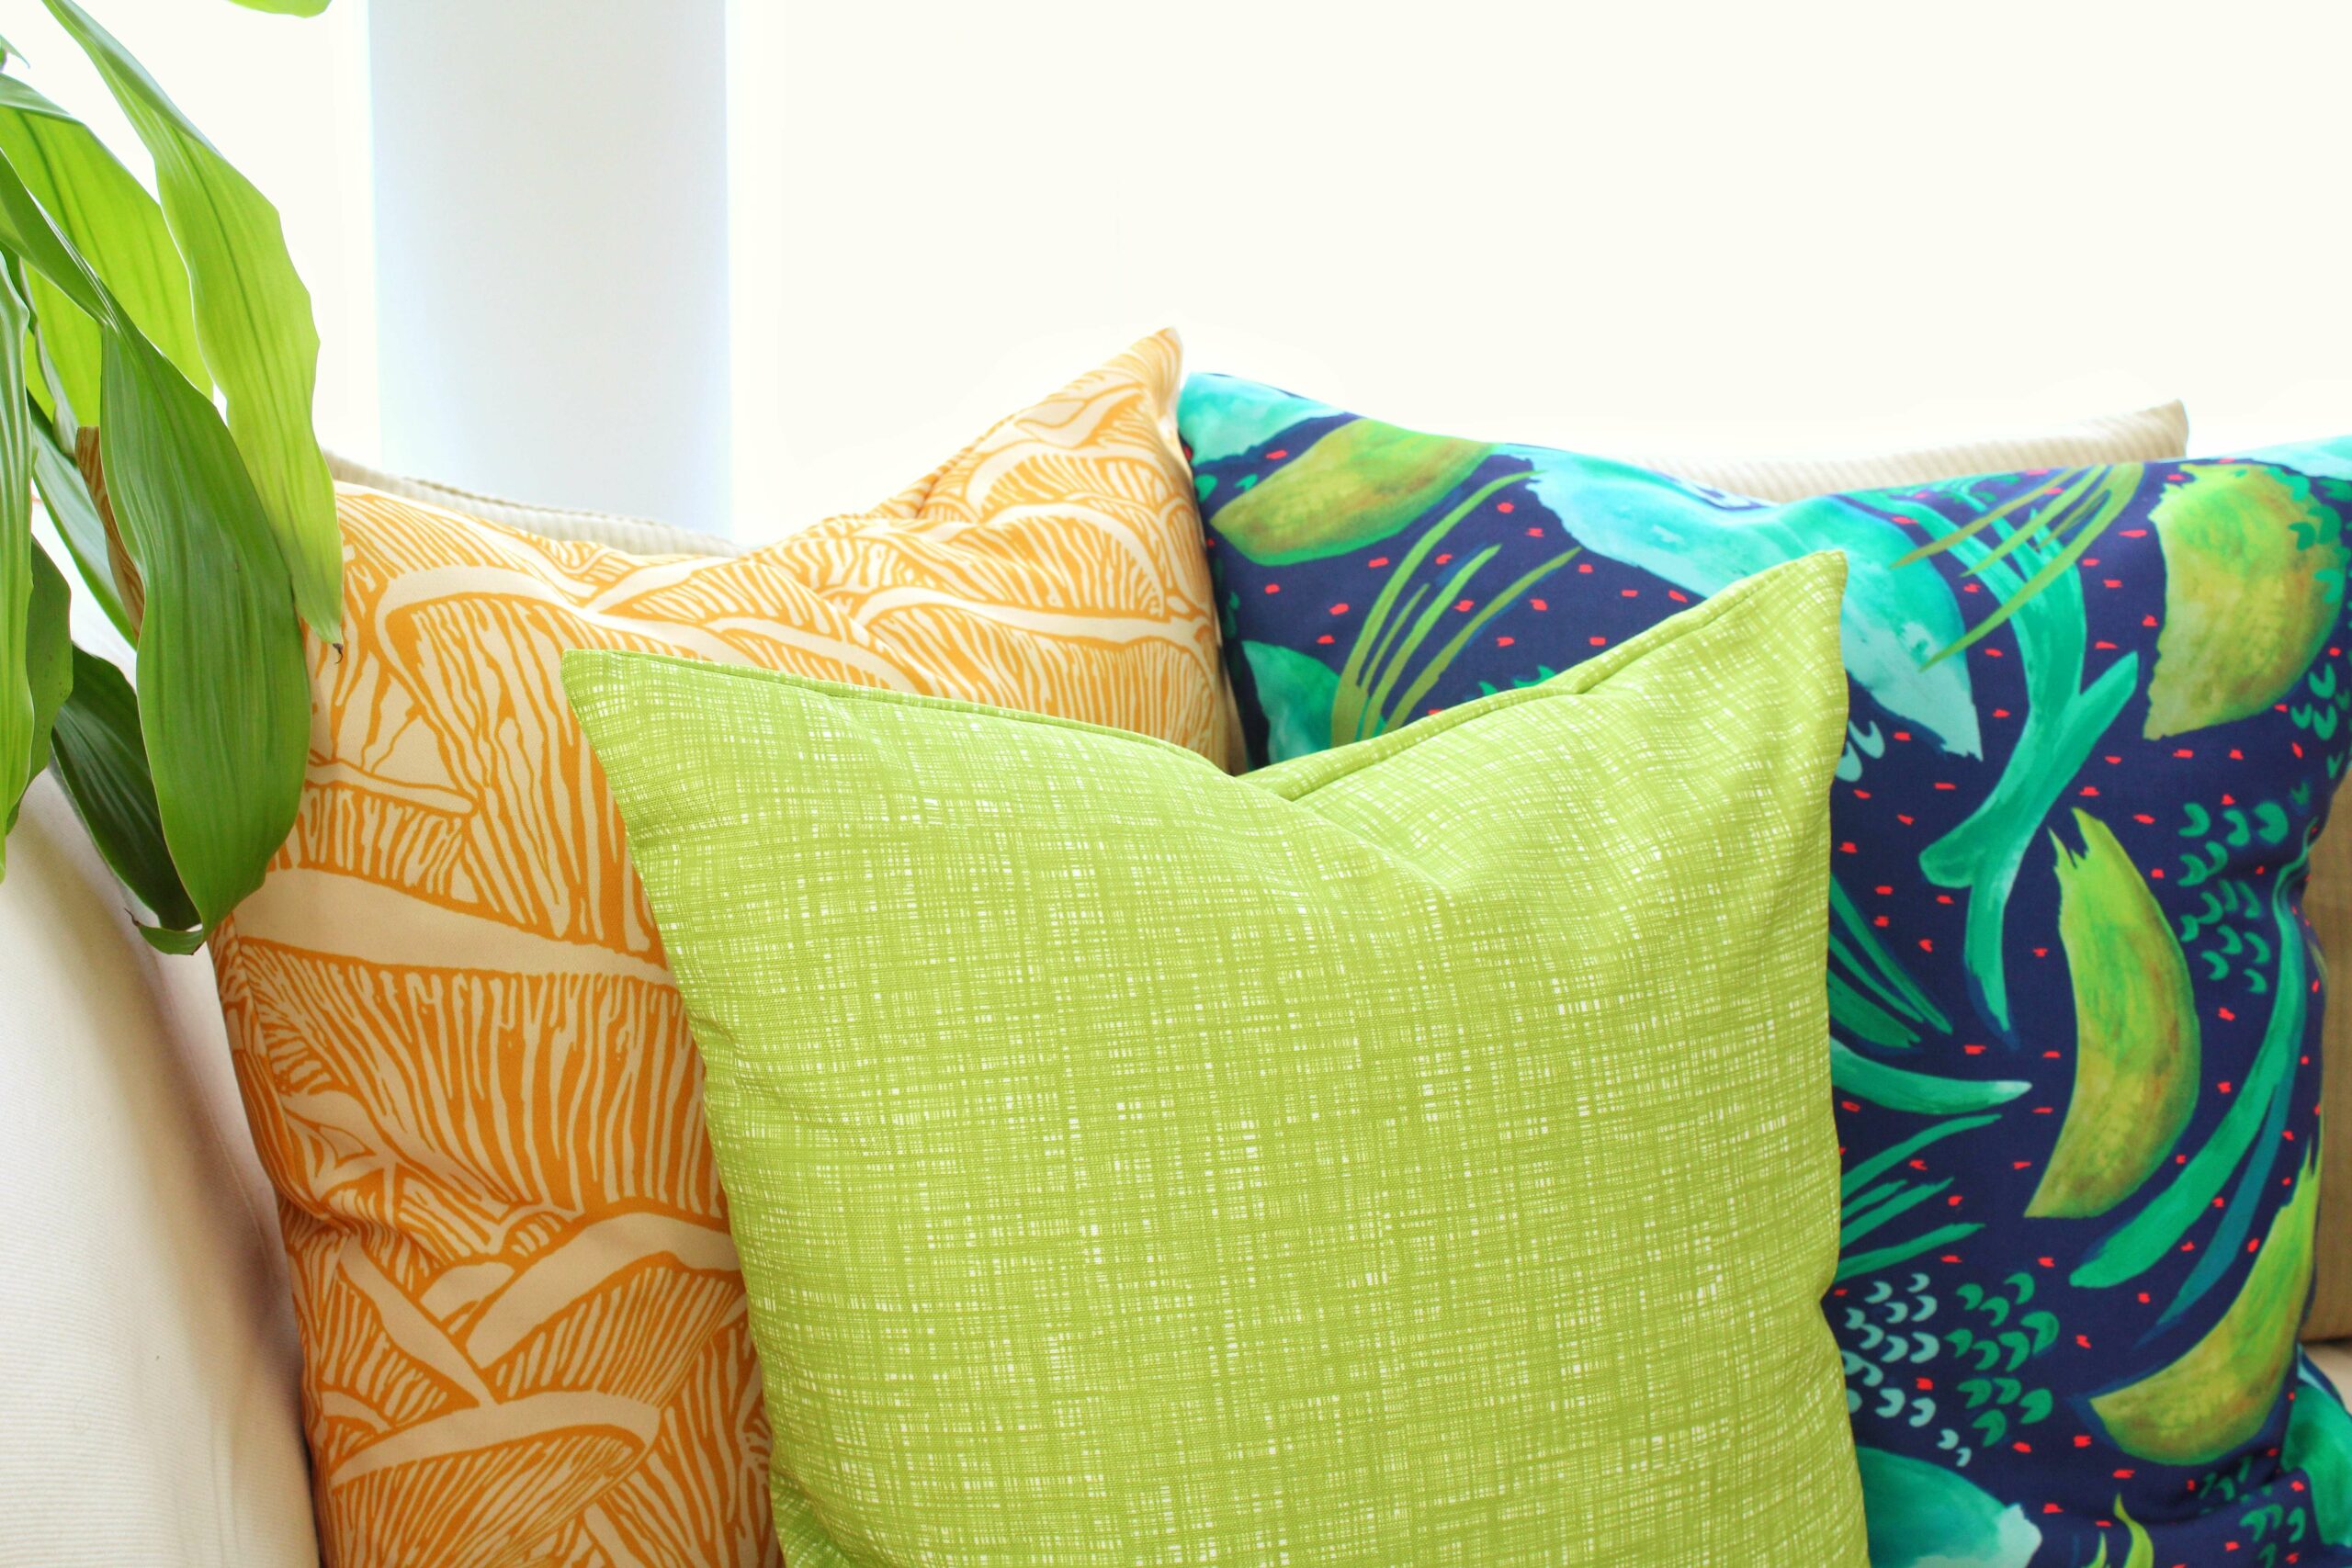 Recycled Canvas pillows